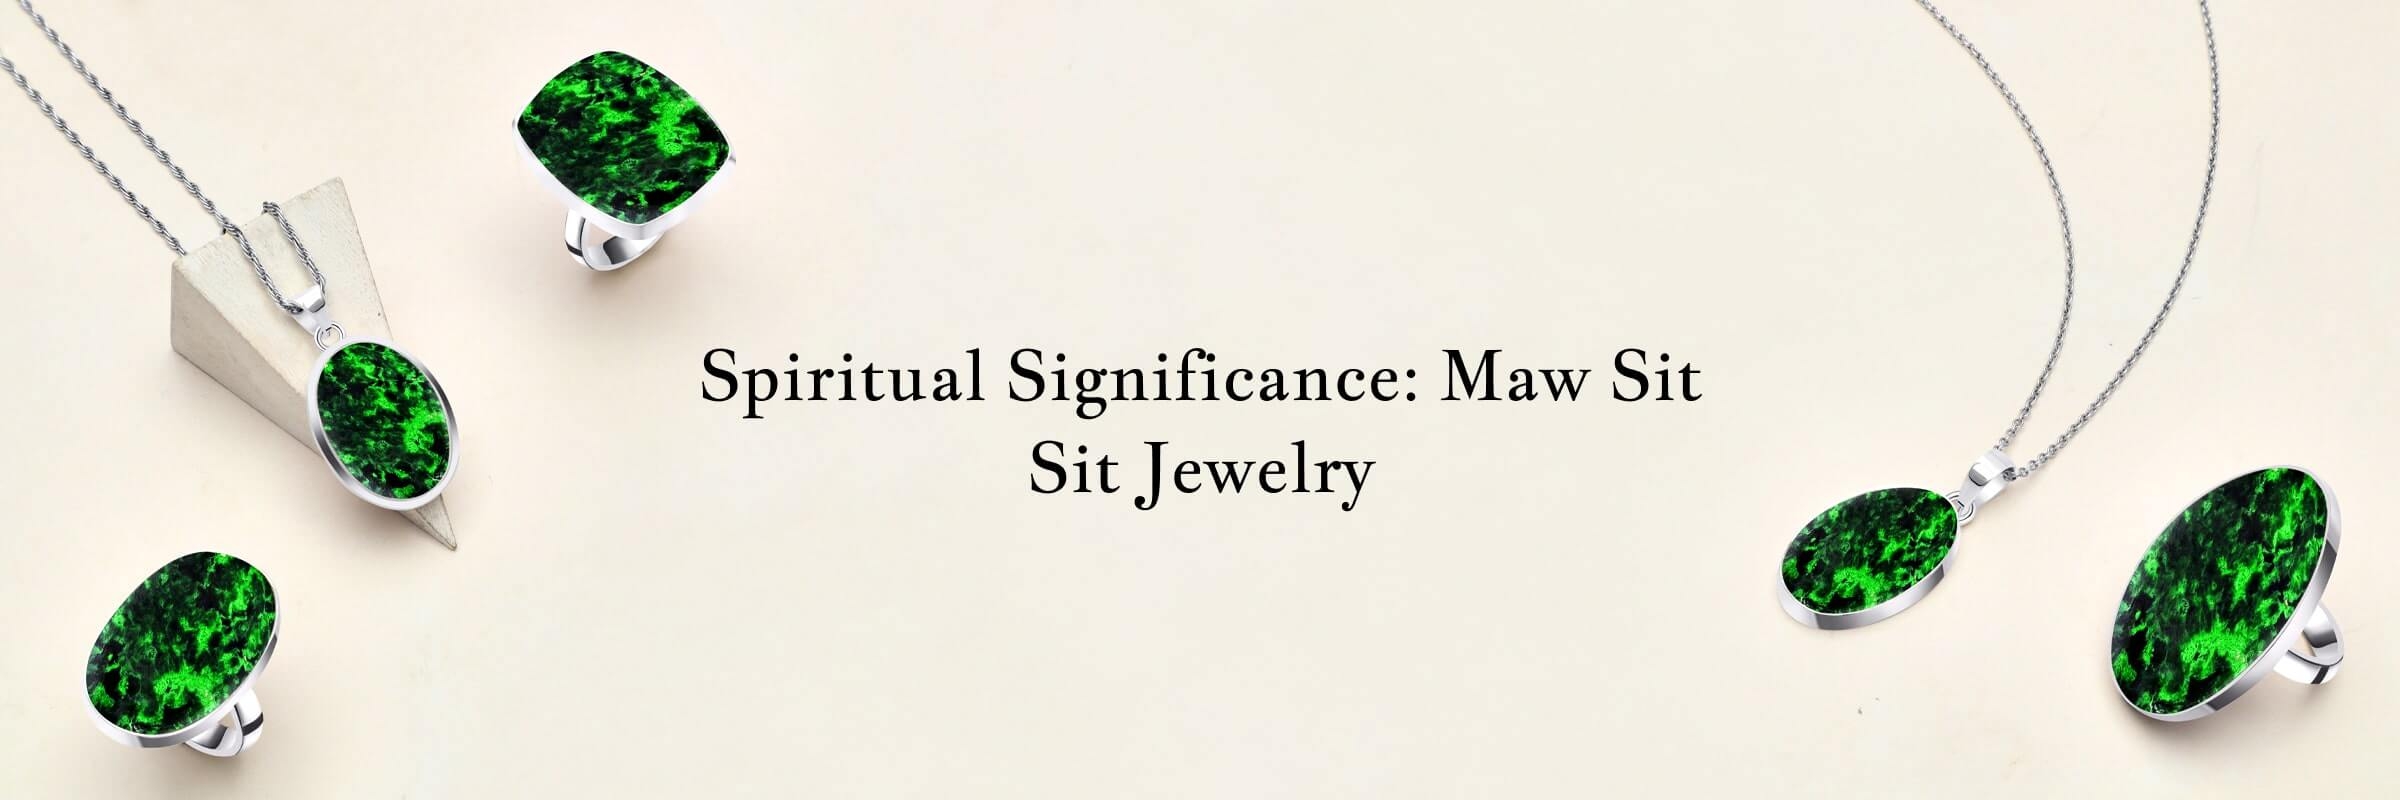 Beliefs Associated With Maw Sit Sit Sterling Silver Jewelry